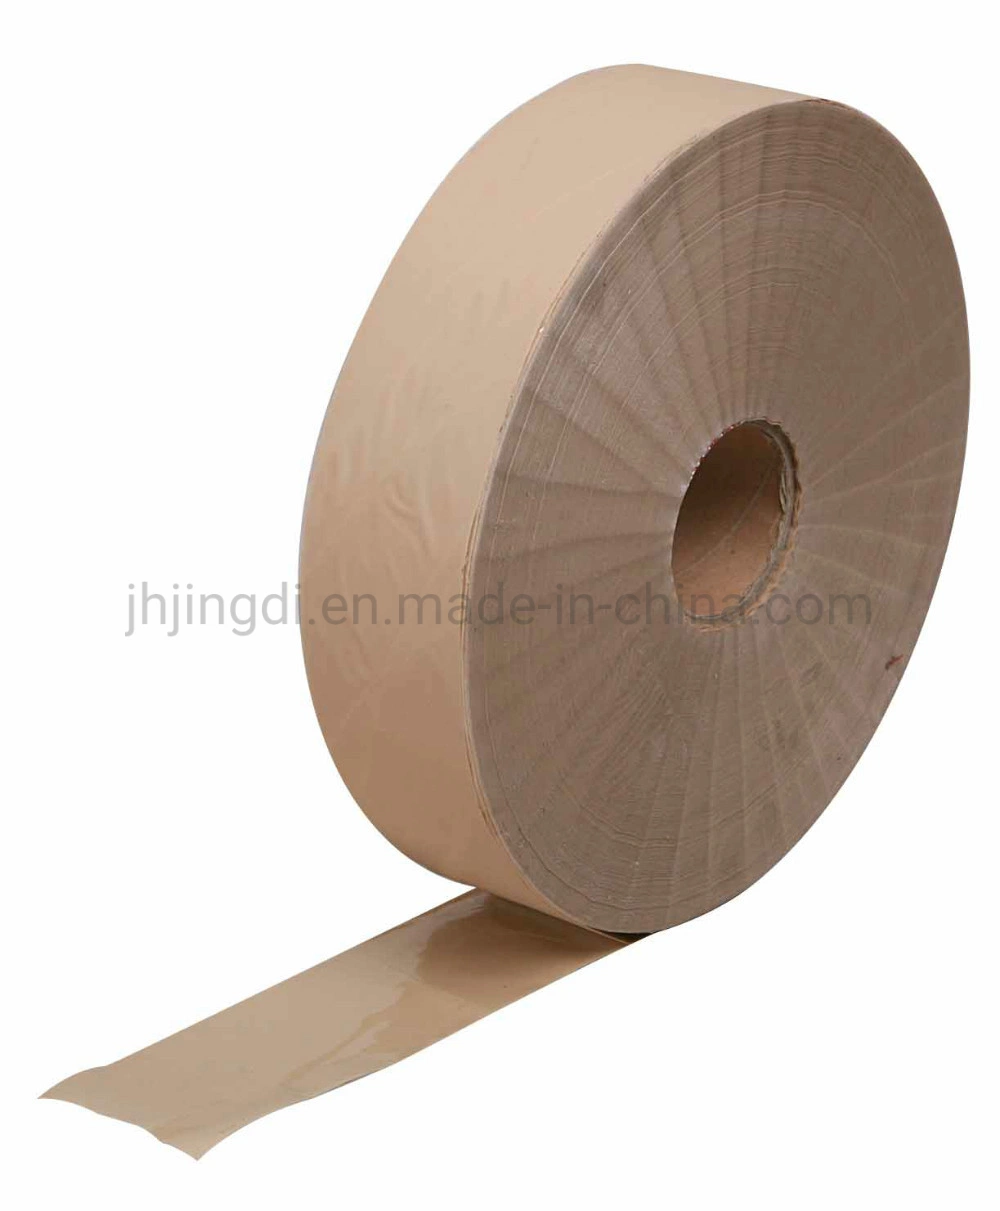 Direct Manufacture Raw Material Adhesive Bandage Jumbo Rolls for Wound Plaster Jumbo Roll-Skin Color/White Cotton/Elastic Fabric Semi-Finished Products